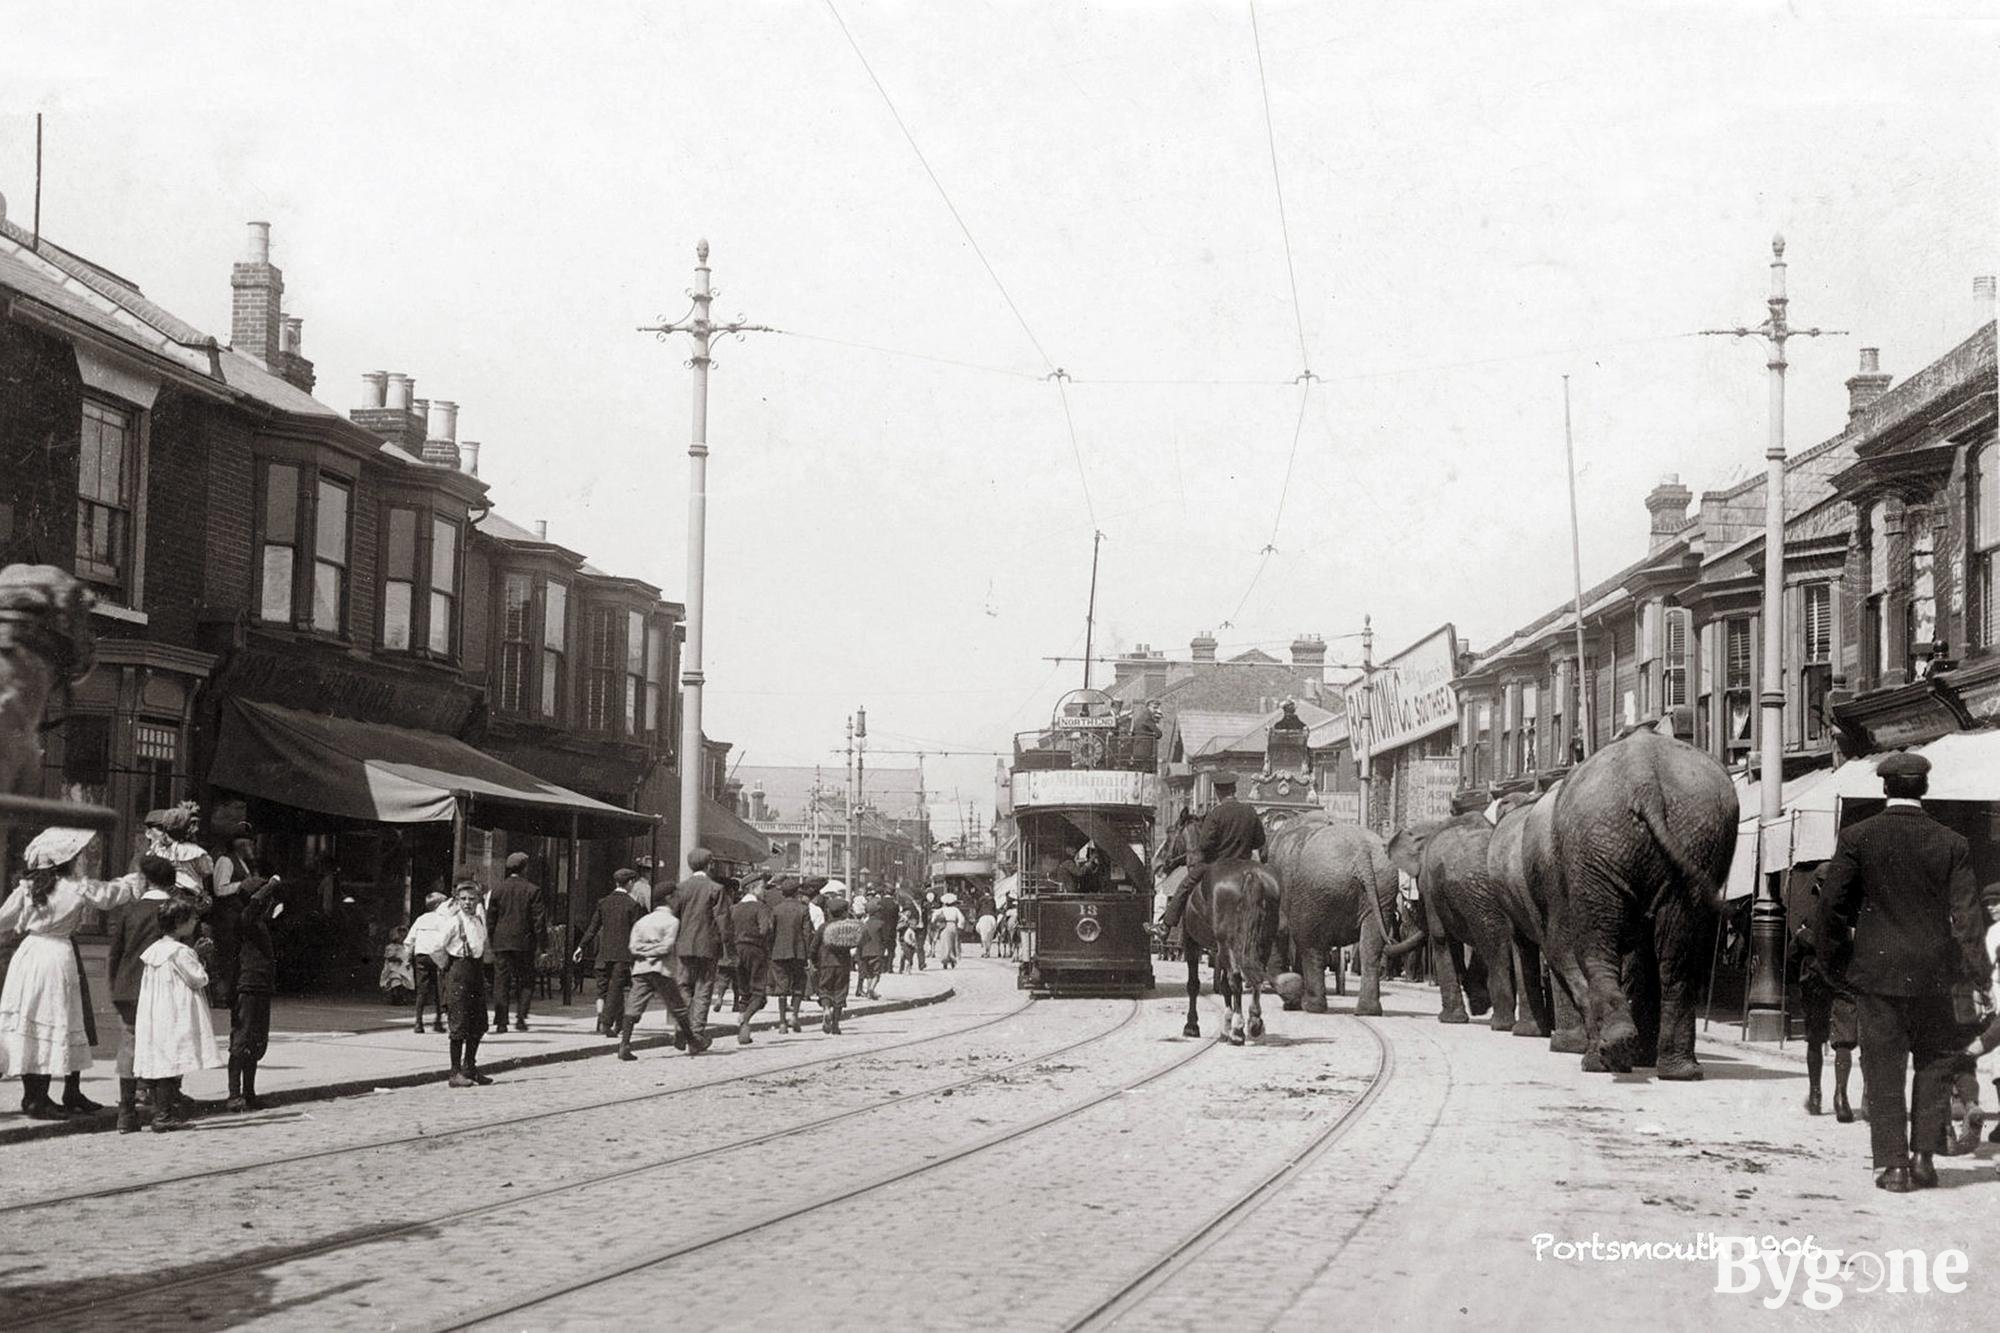 Landscape of a tramline with a tram in the centre and four elephants walking up the road. There is a procession of children and people walking along the street on the other side of the road and a man on a horse walking alongside the elephants.